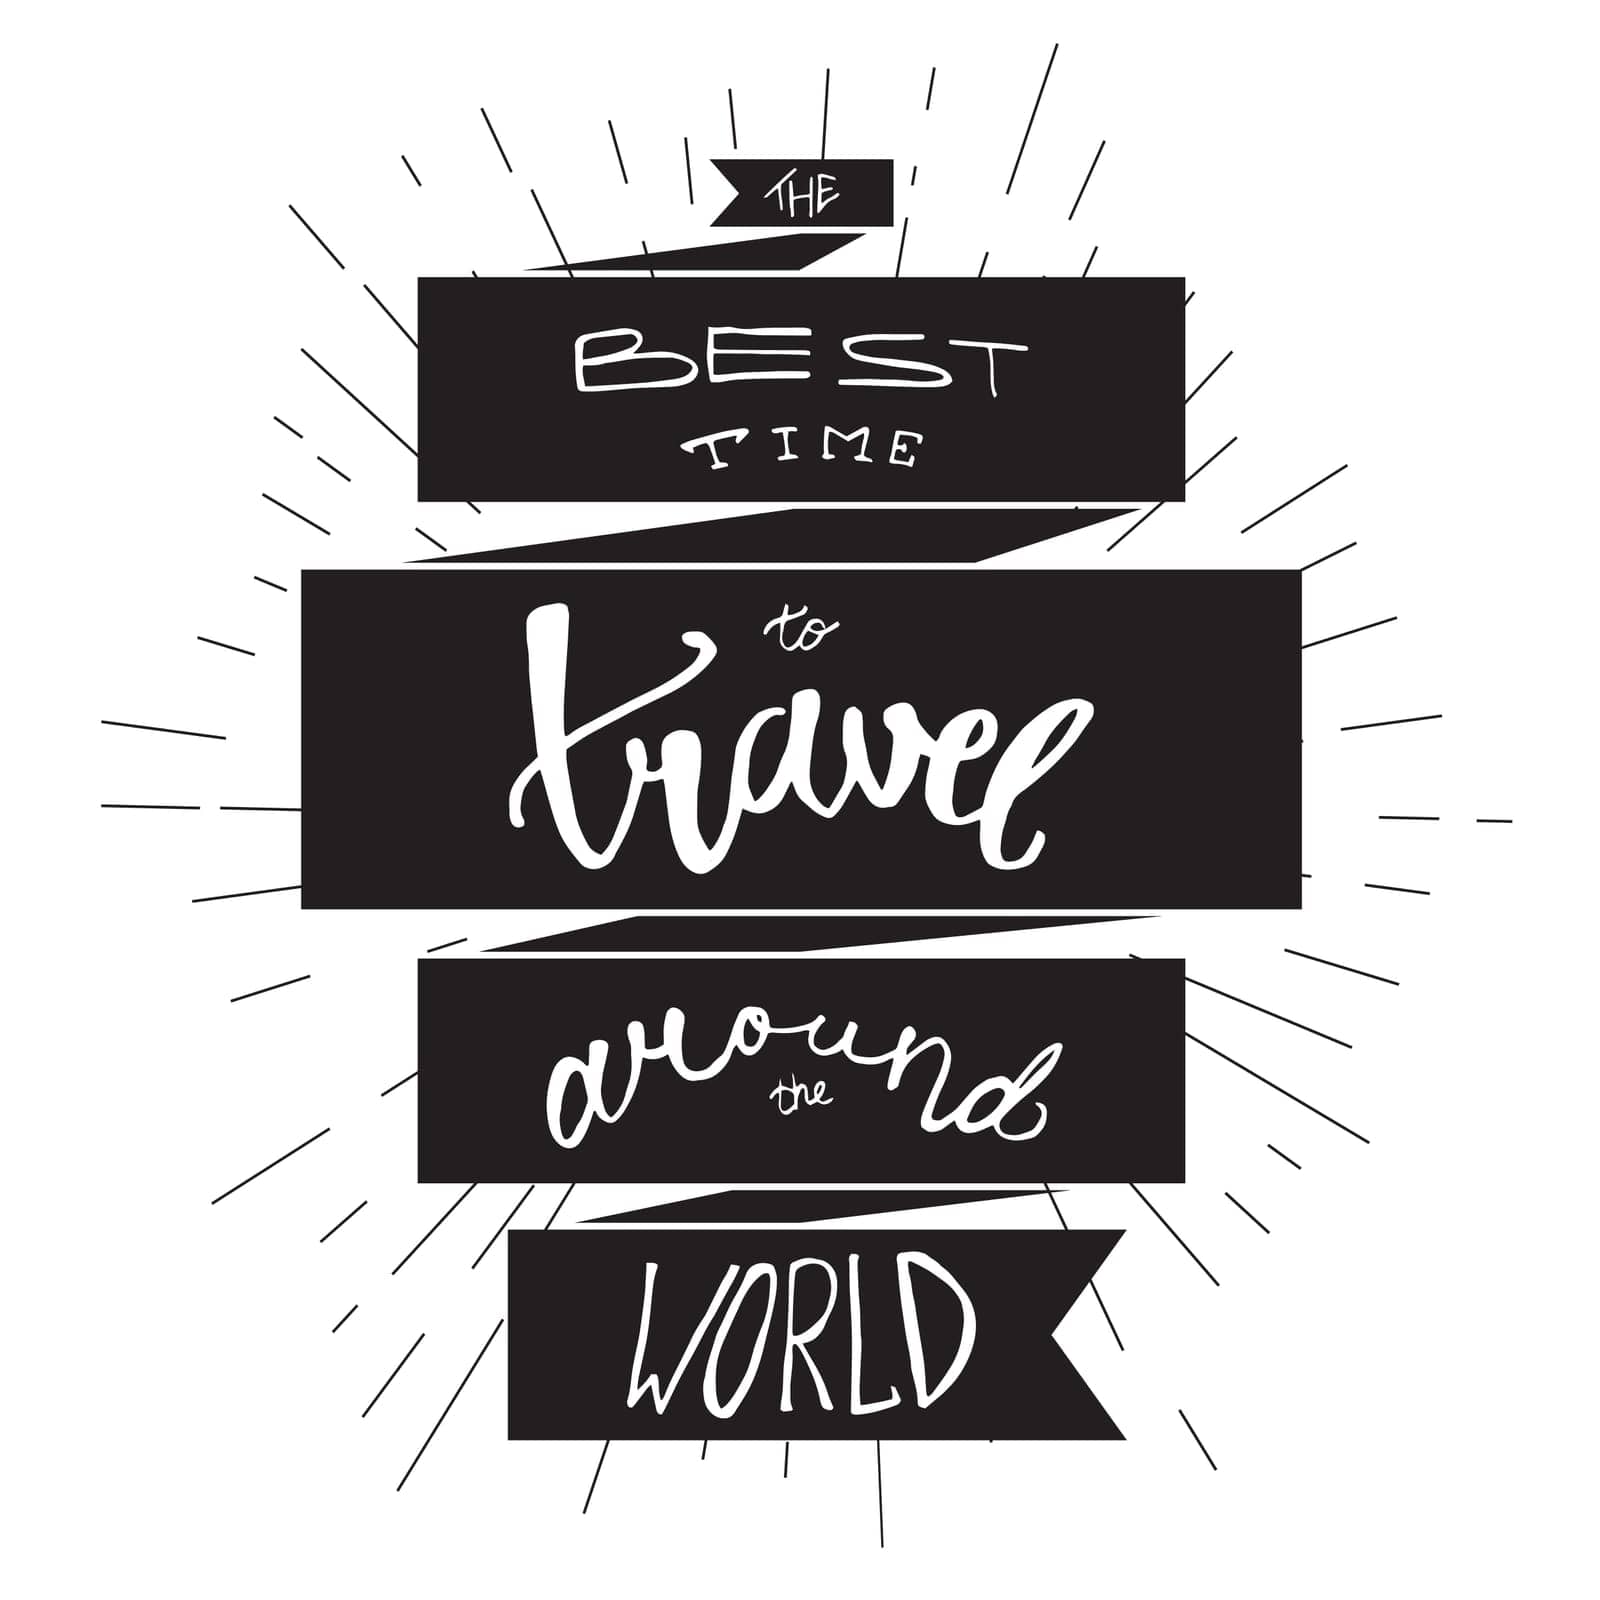 Inspirational retro lettering in ribbon for print, t-shirt, poster, tourism and travel emblems, logo. Vintage motivational poster design element. The best time to travel around the world. Vector